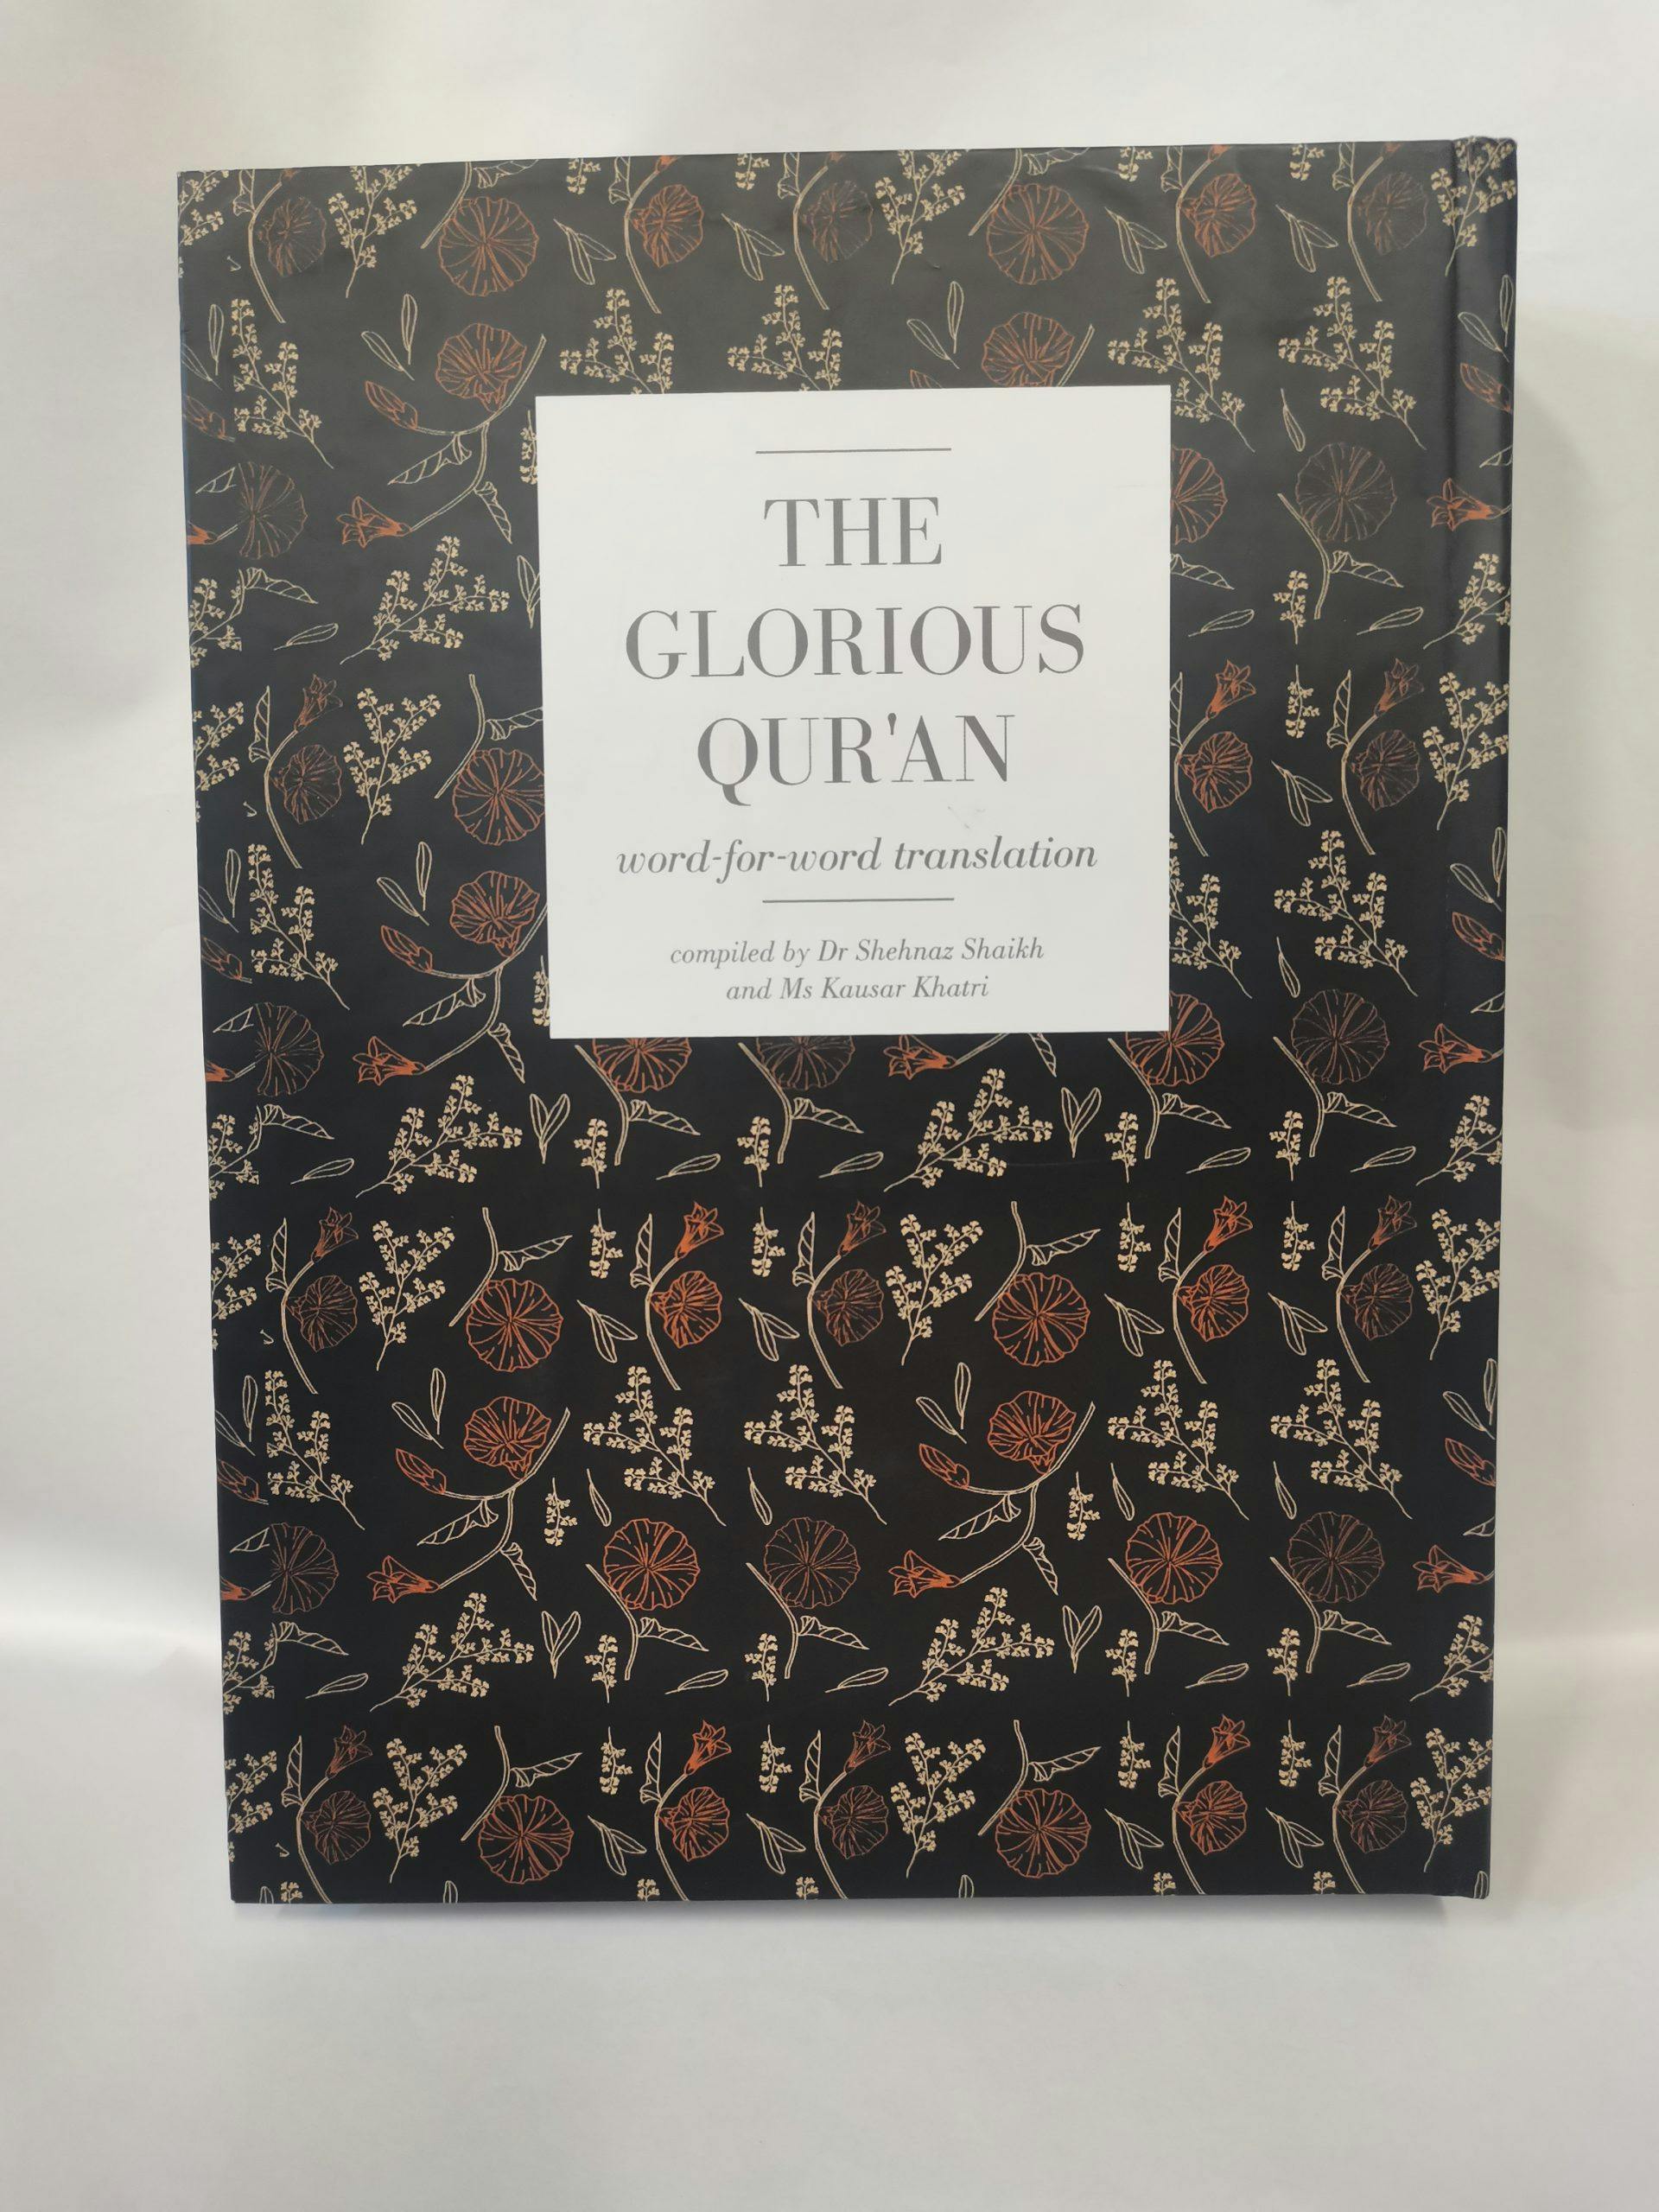 The Glorious Qur'an (word-for-word)